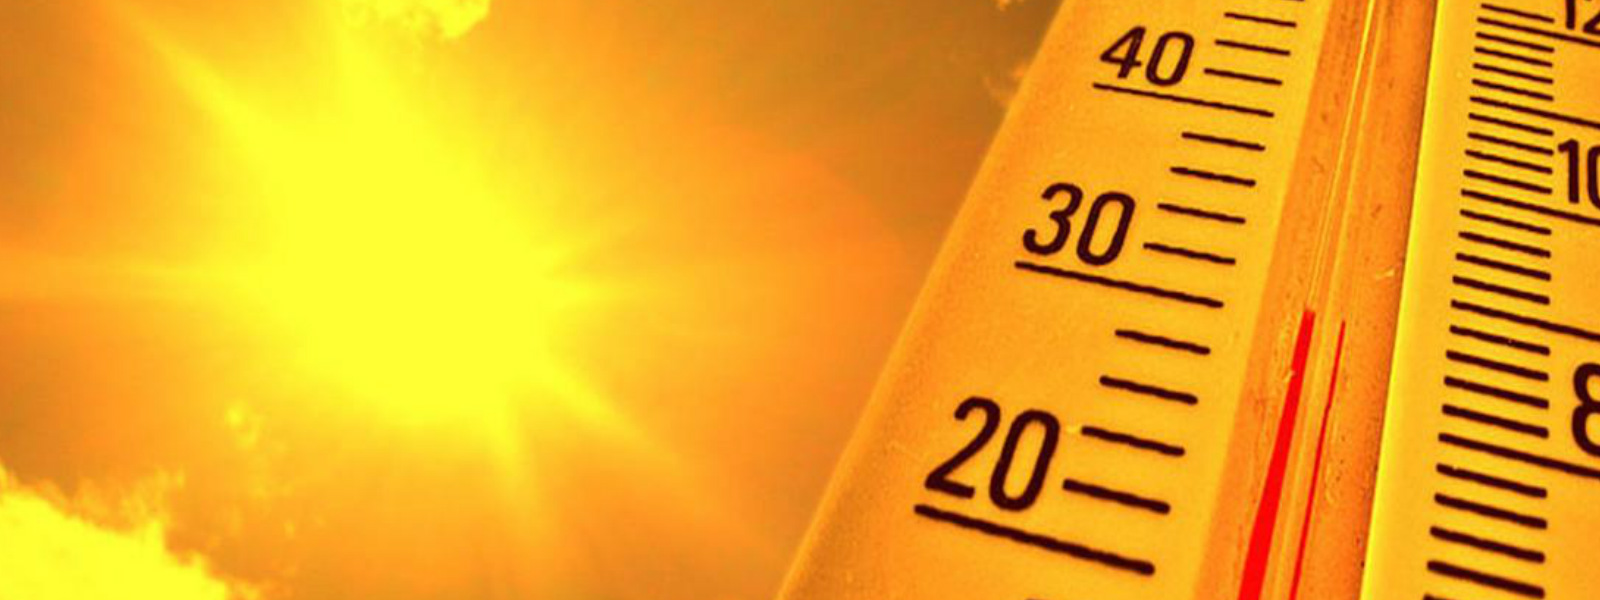 Health ministry issues warning on extreme heat